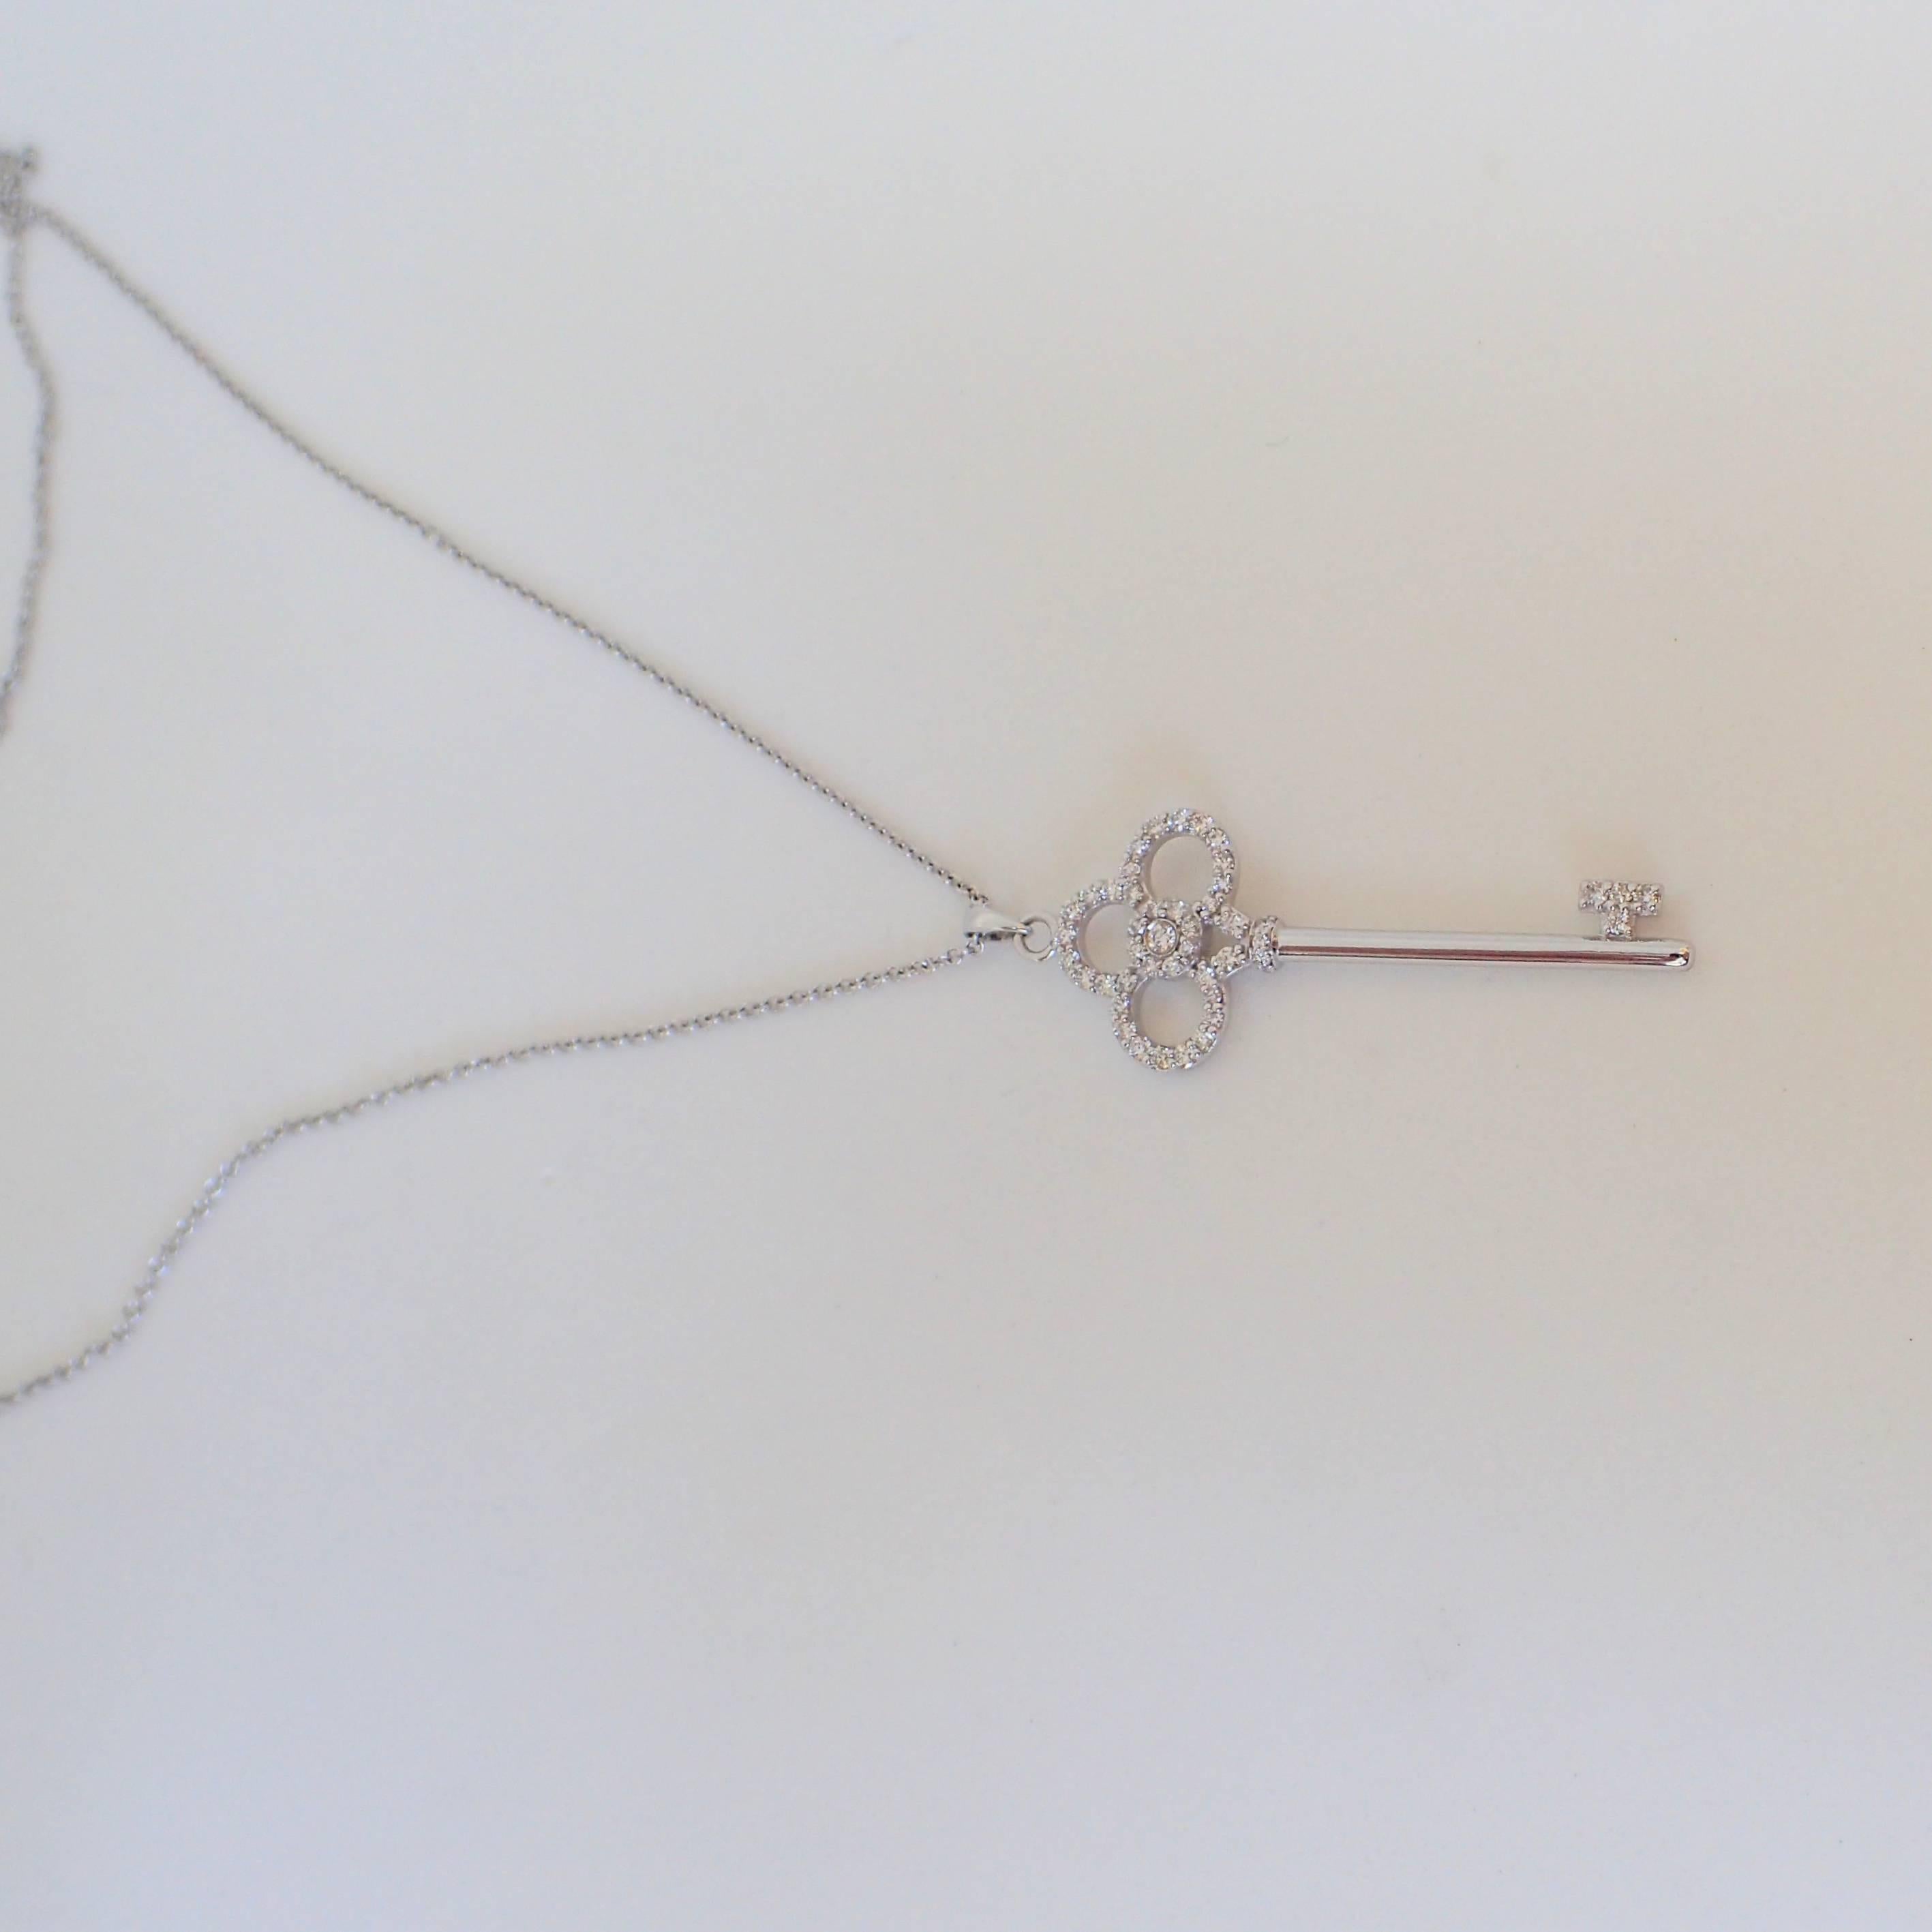 18 Karat White Gold Key Pendant with 0.43 Carat of Diamond on Cable Chain In New Condition For Sale In Coral Gables, FL